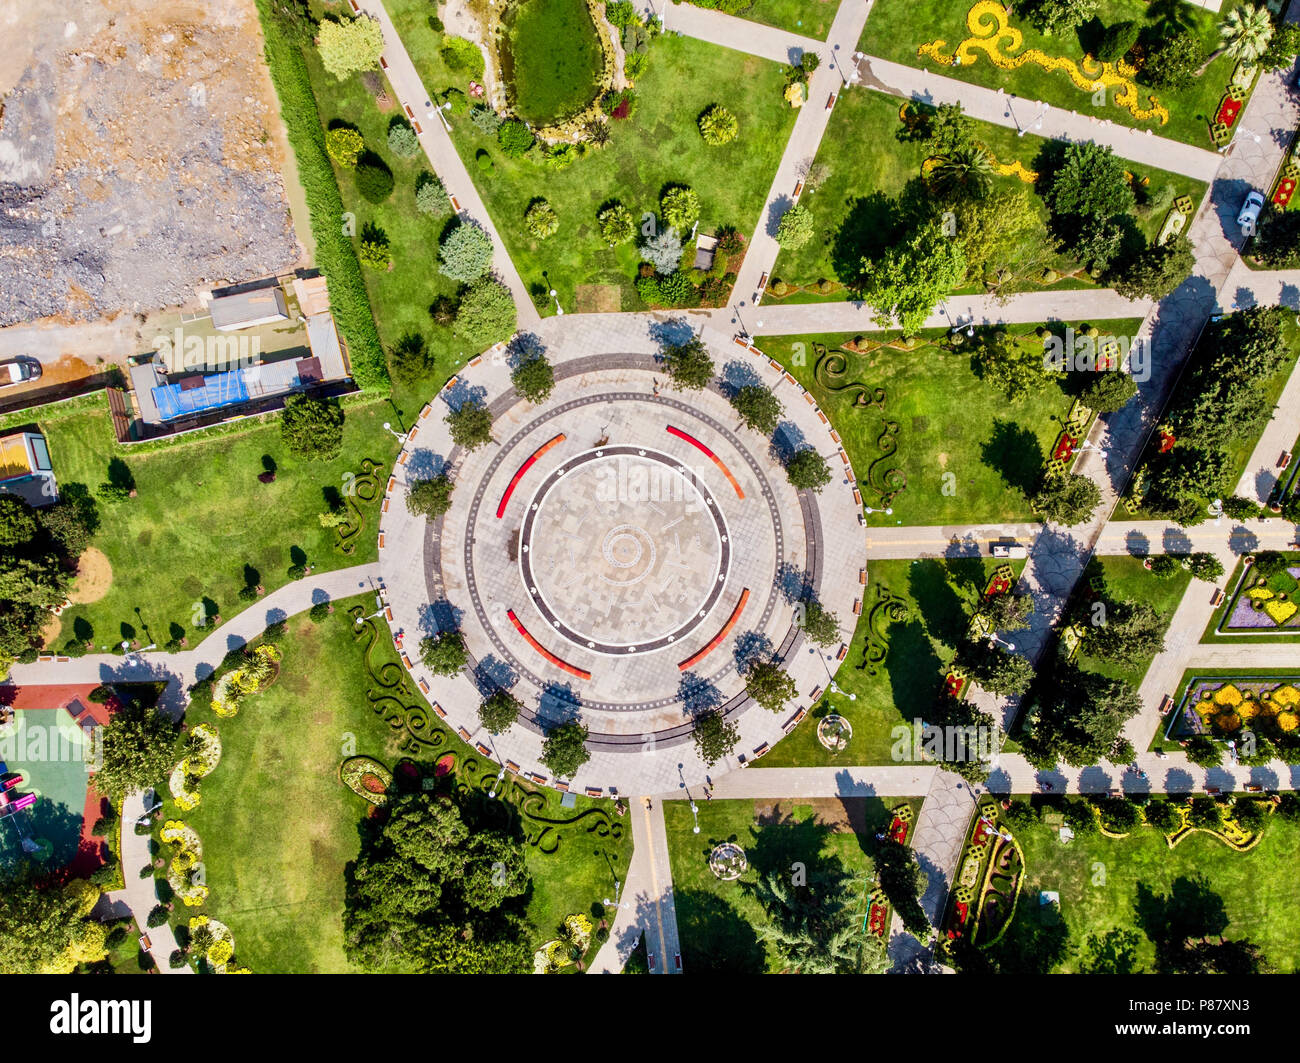 Aerial Drone View of Goztepe 60th Year Park located in Kadikoy, Istanbul.  Cityscape Stock Photo - Alamy